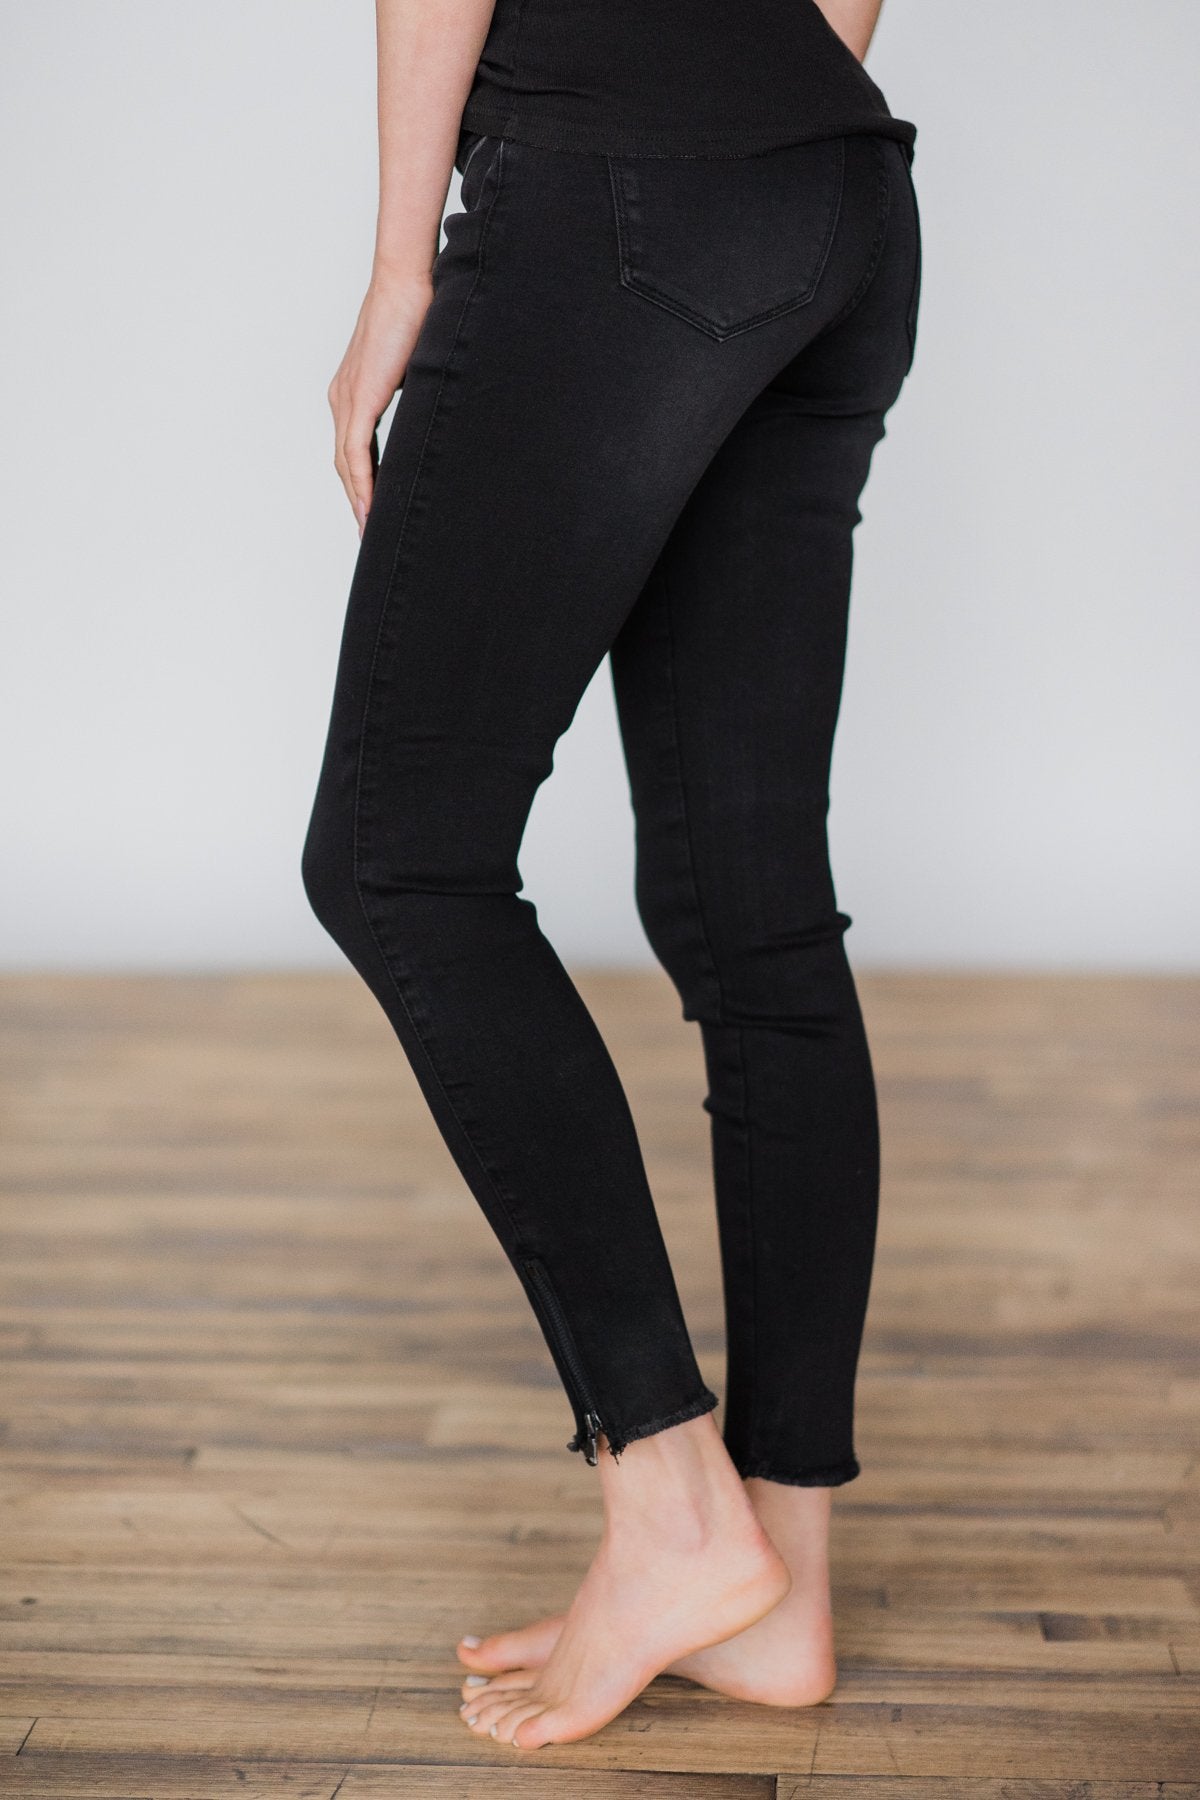 Kan Can Jeans ~ Black Side Ankle Zipper Skinnies